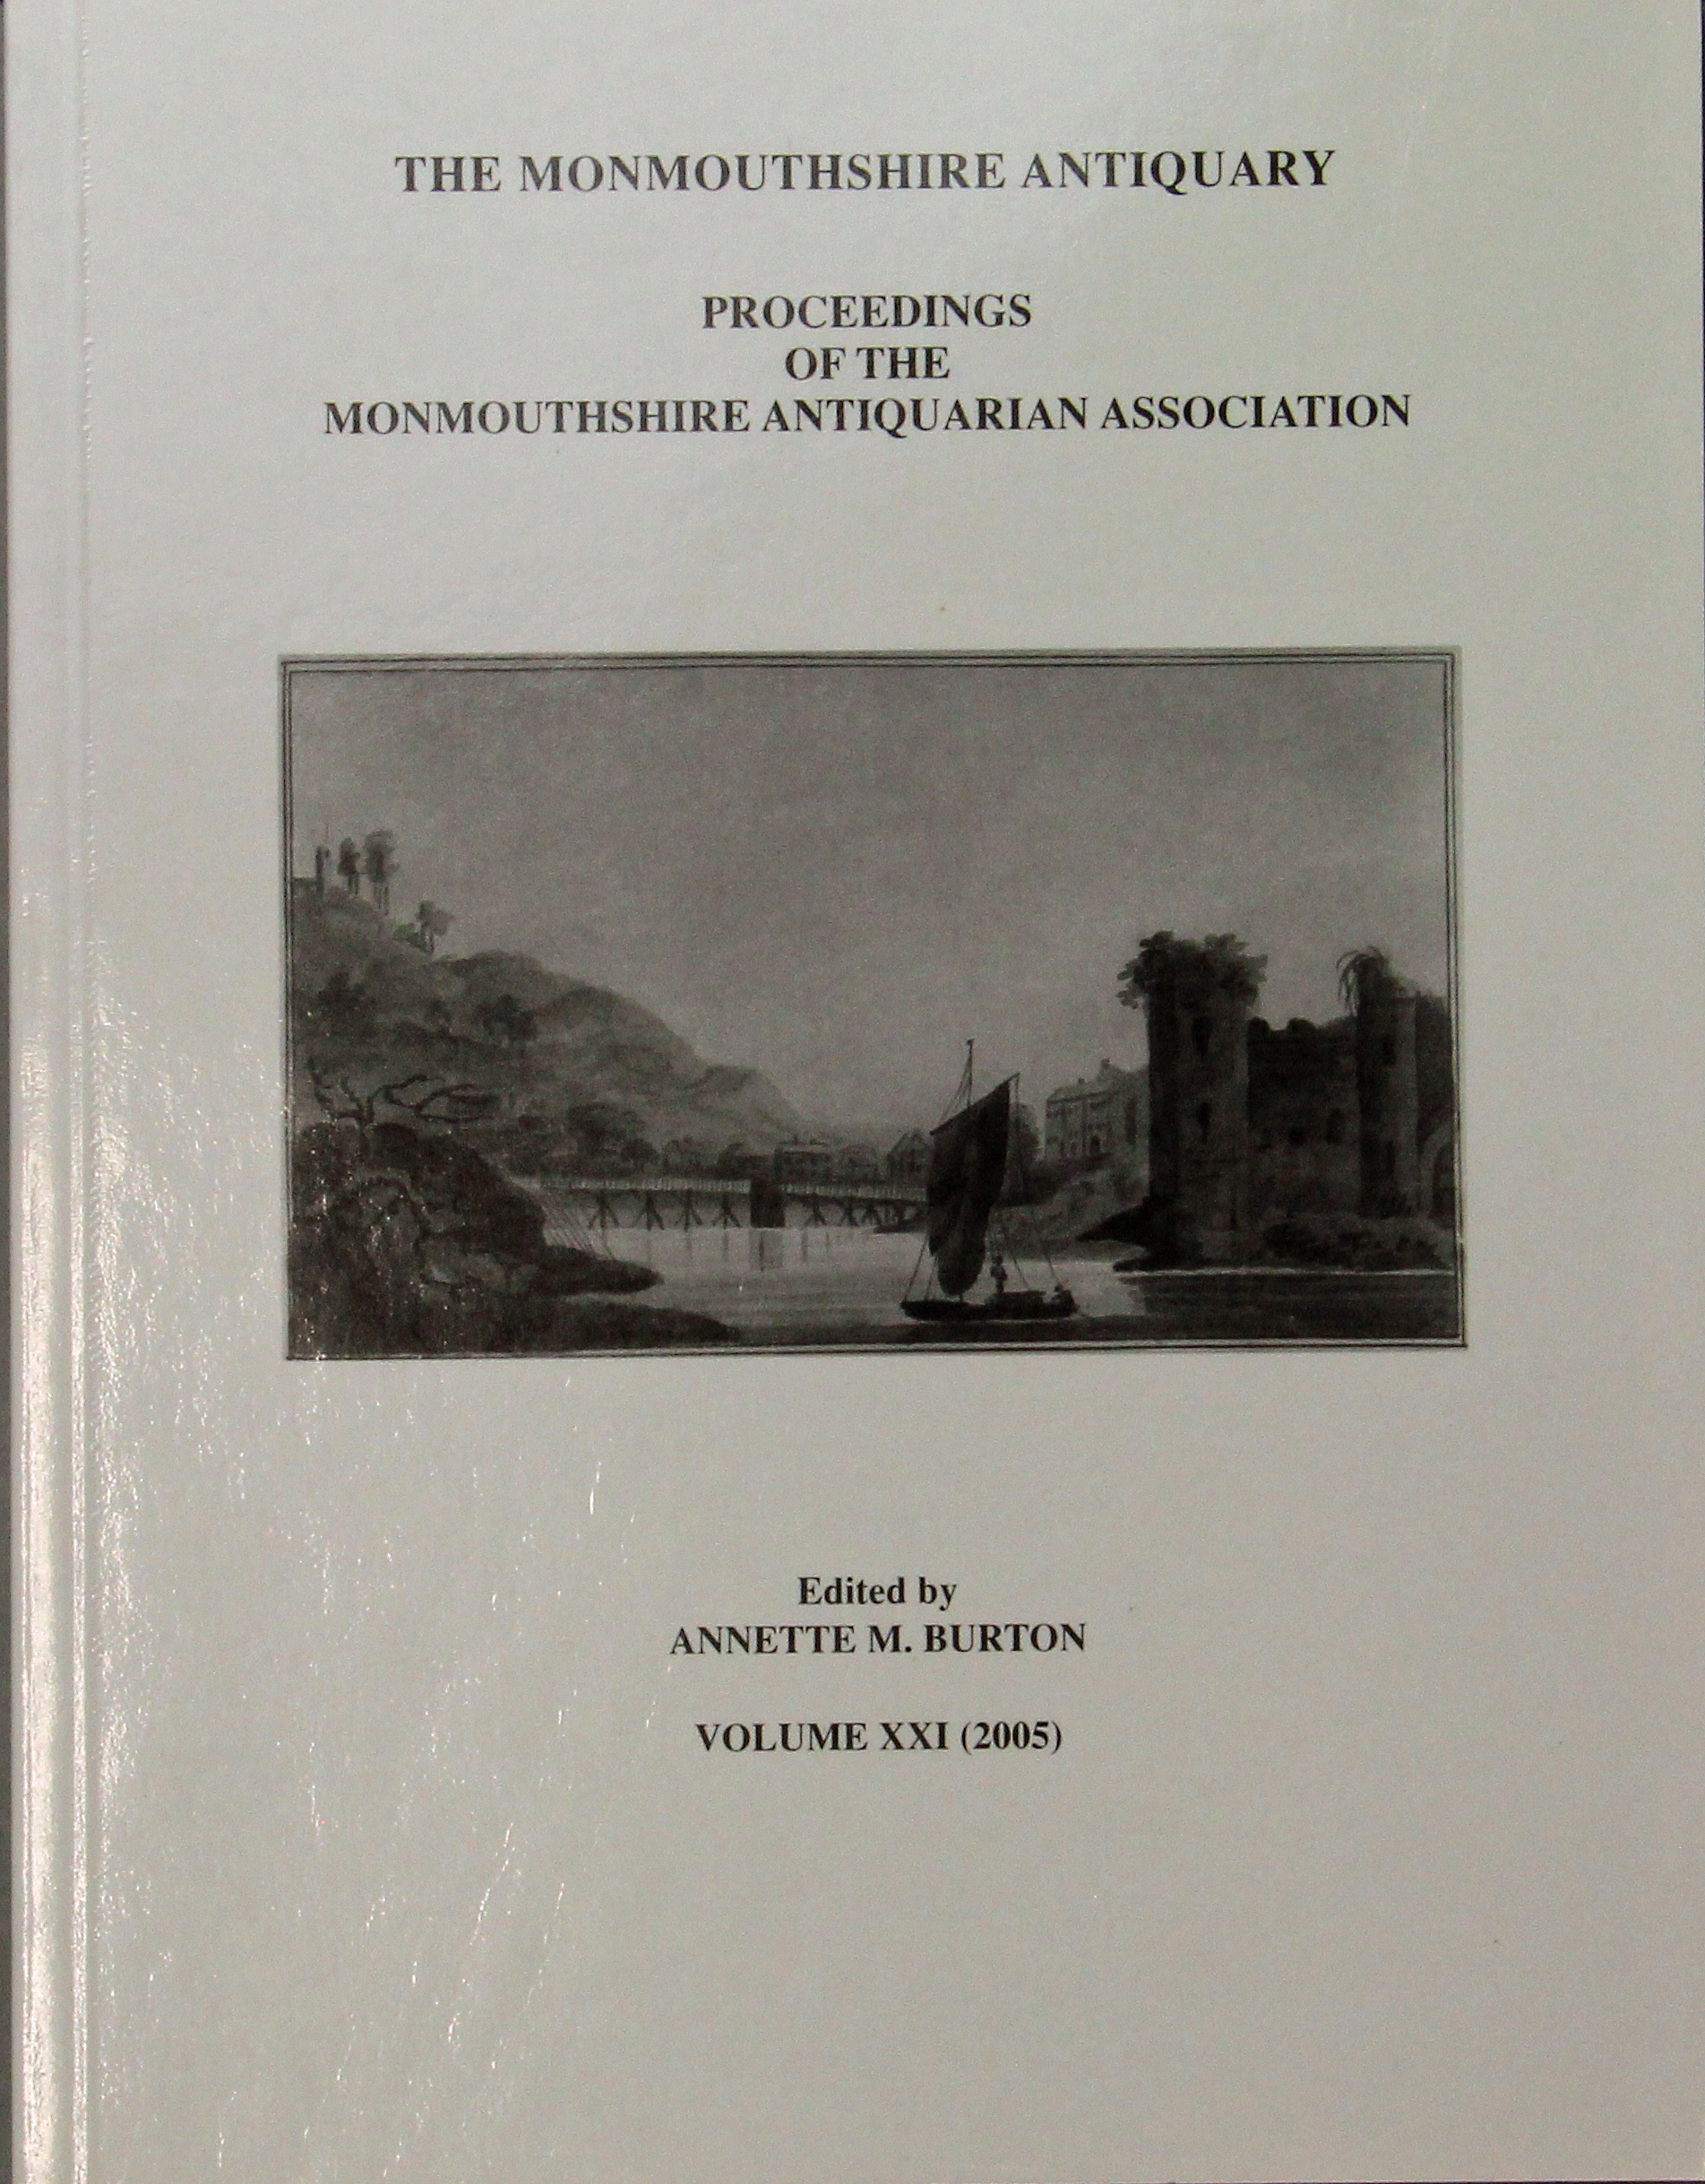 The Monmouthshire Antiquary Volume 21, 2005, Free (Donation of at least £2.00 to cover postage)